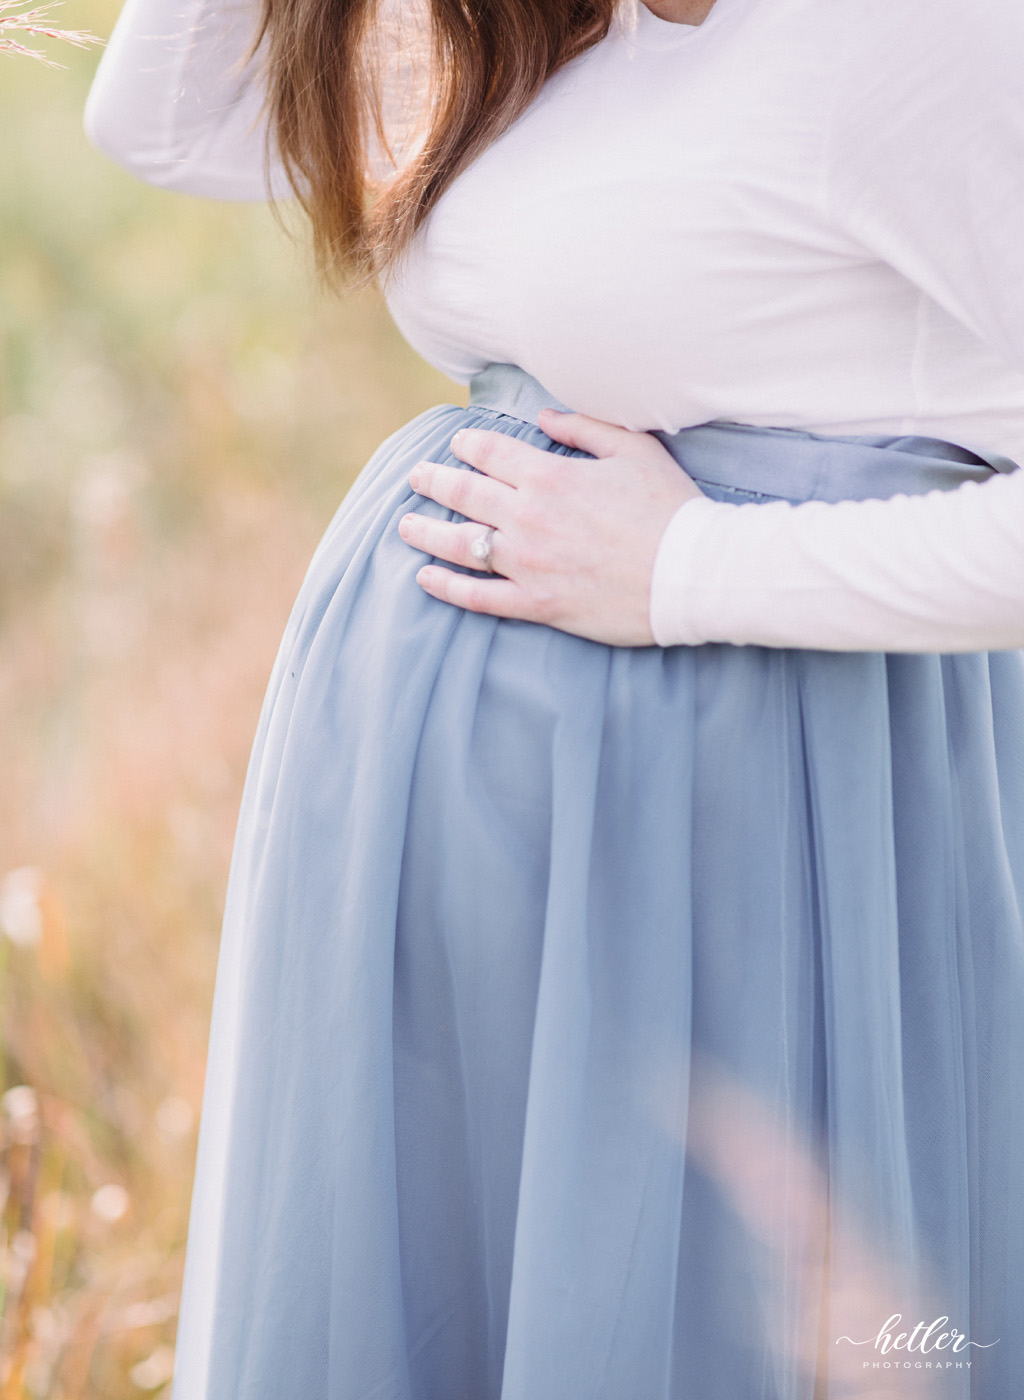 Grand Rapids light and airy maternity photography